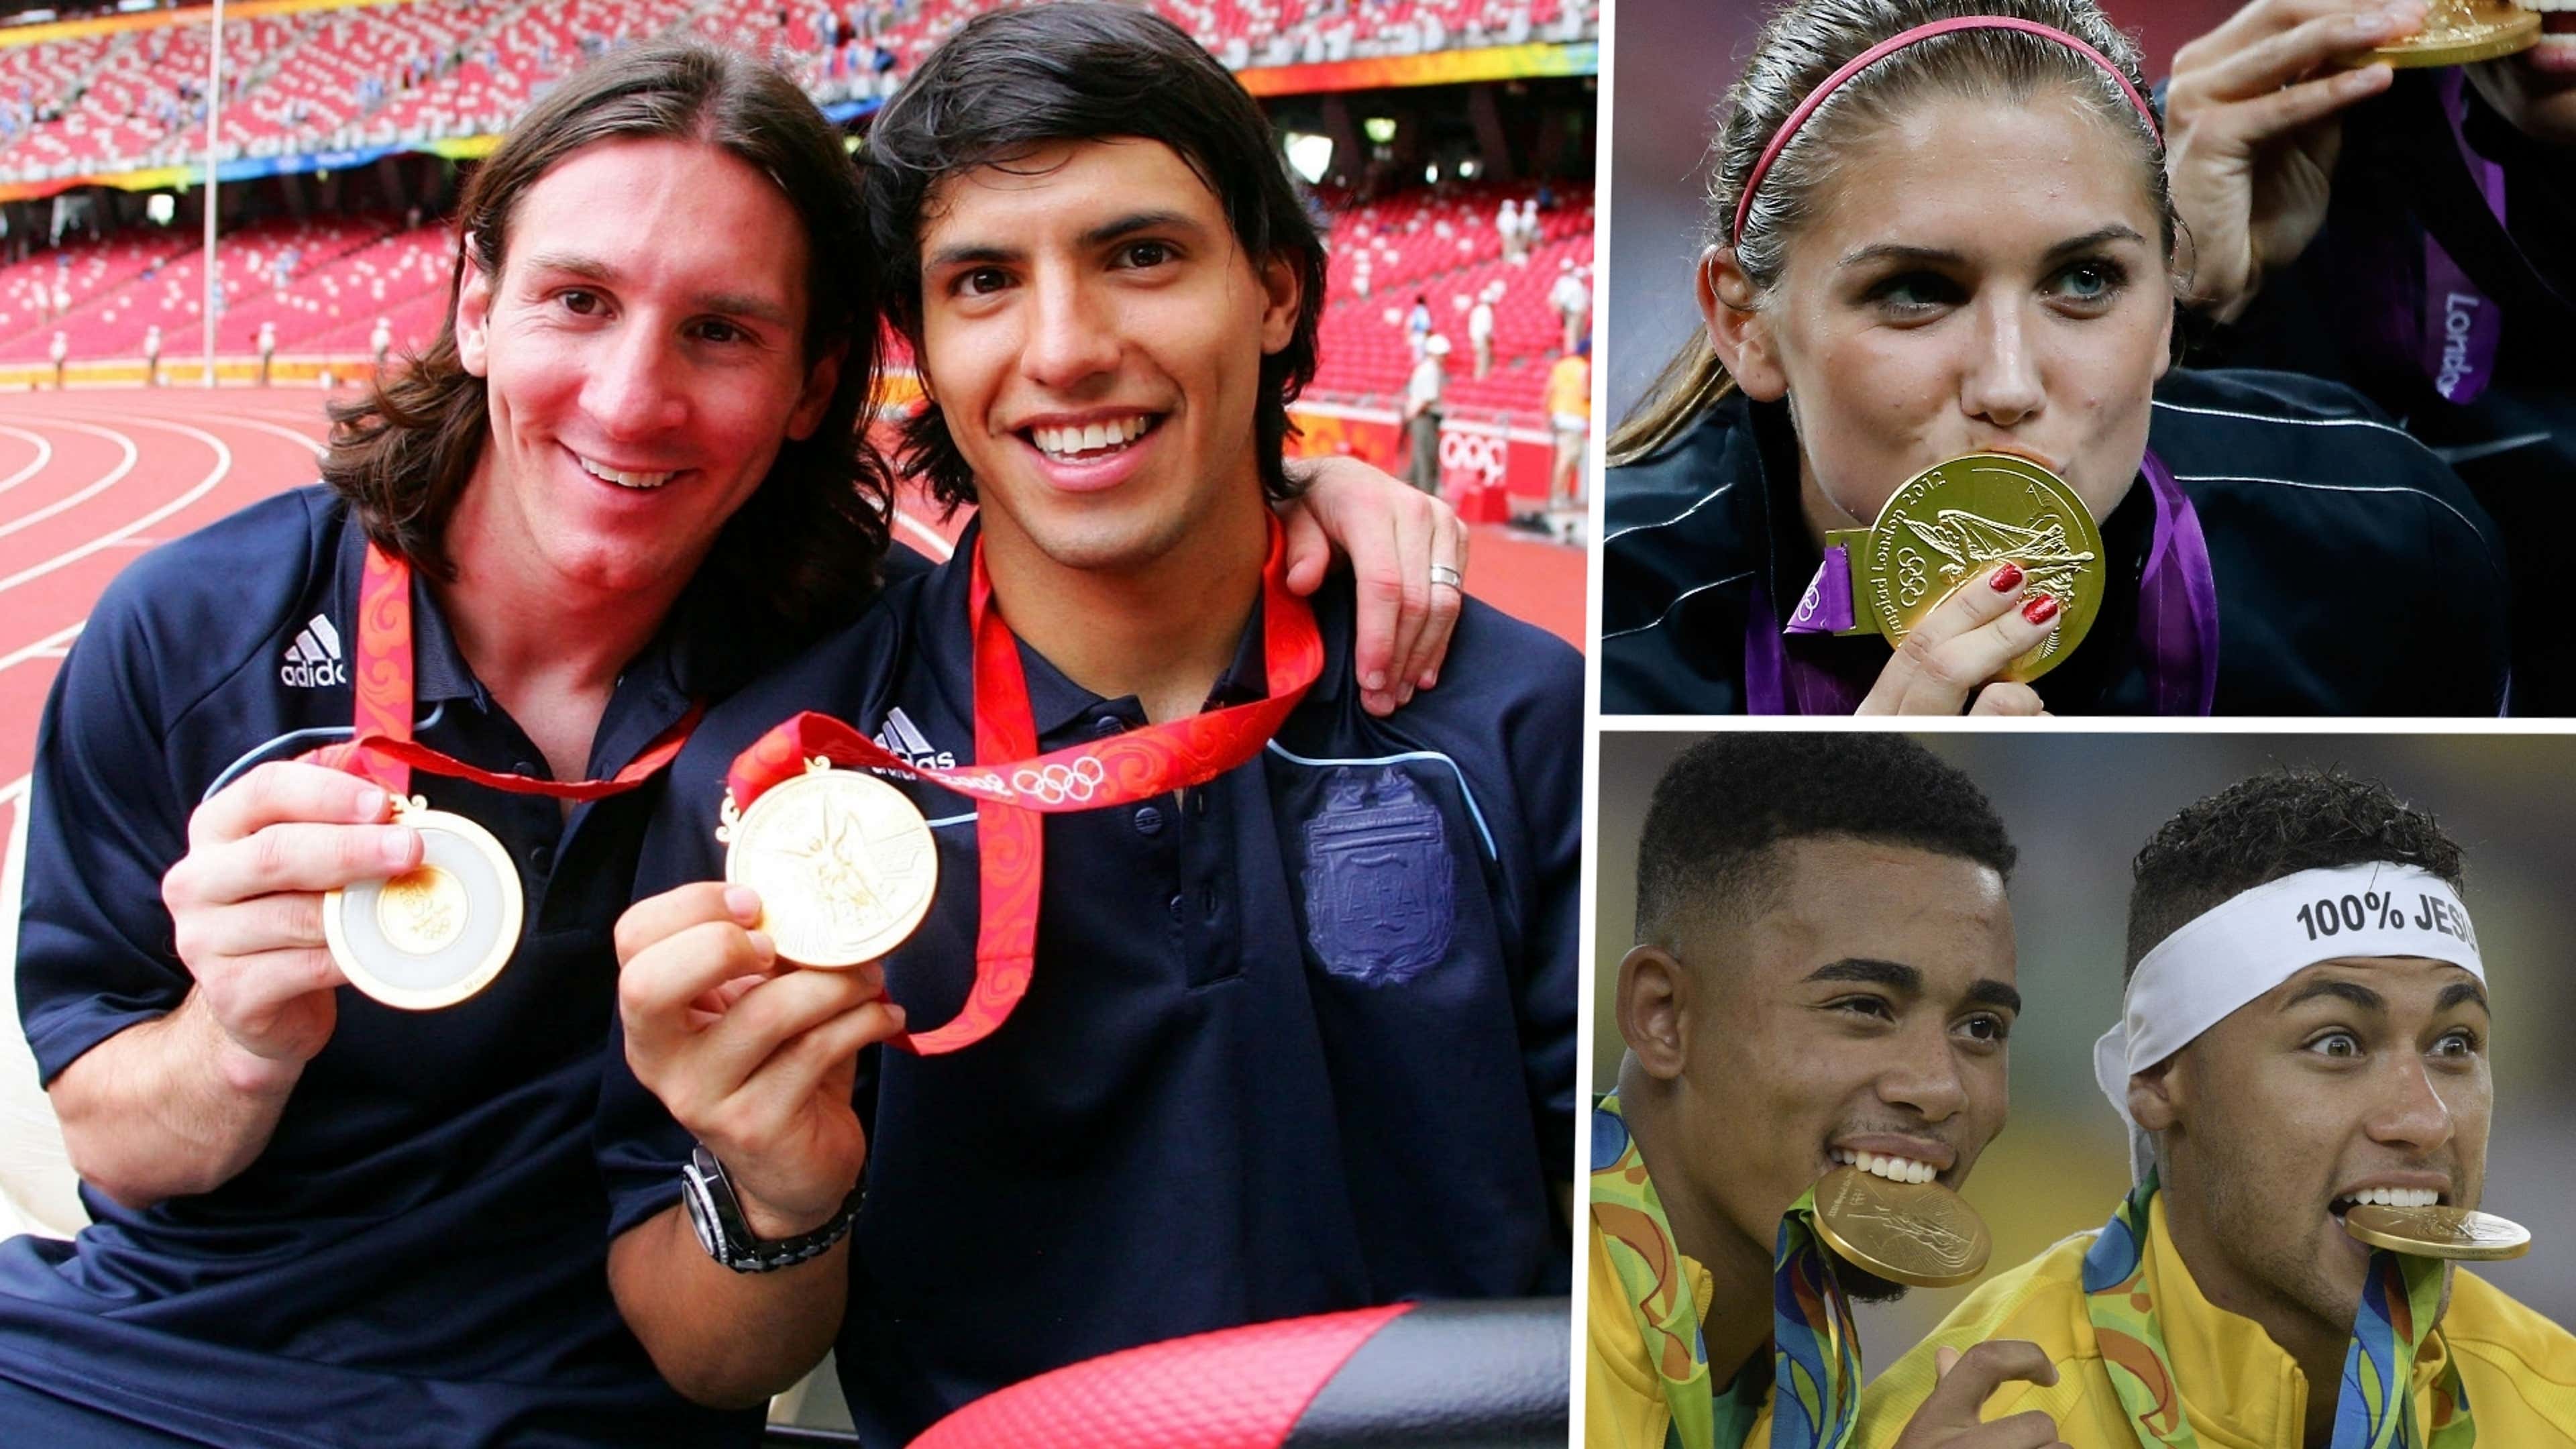 How much gold is in an Olympic gold medal?